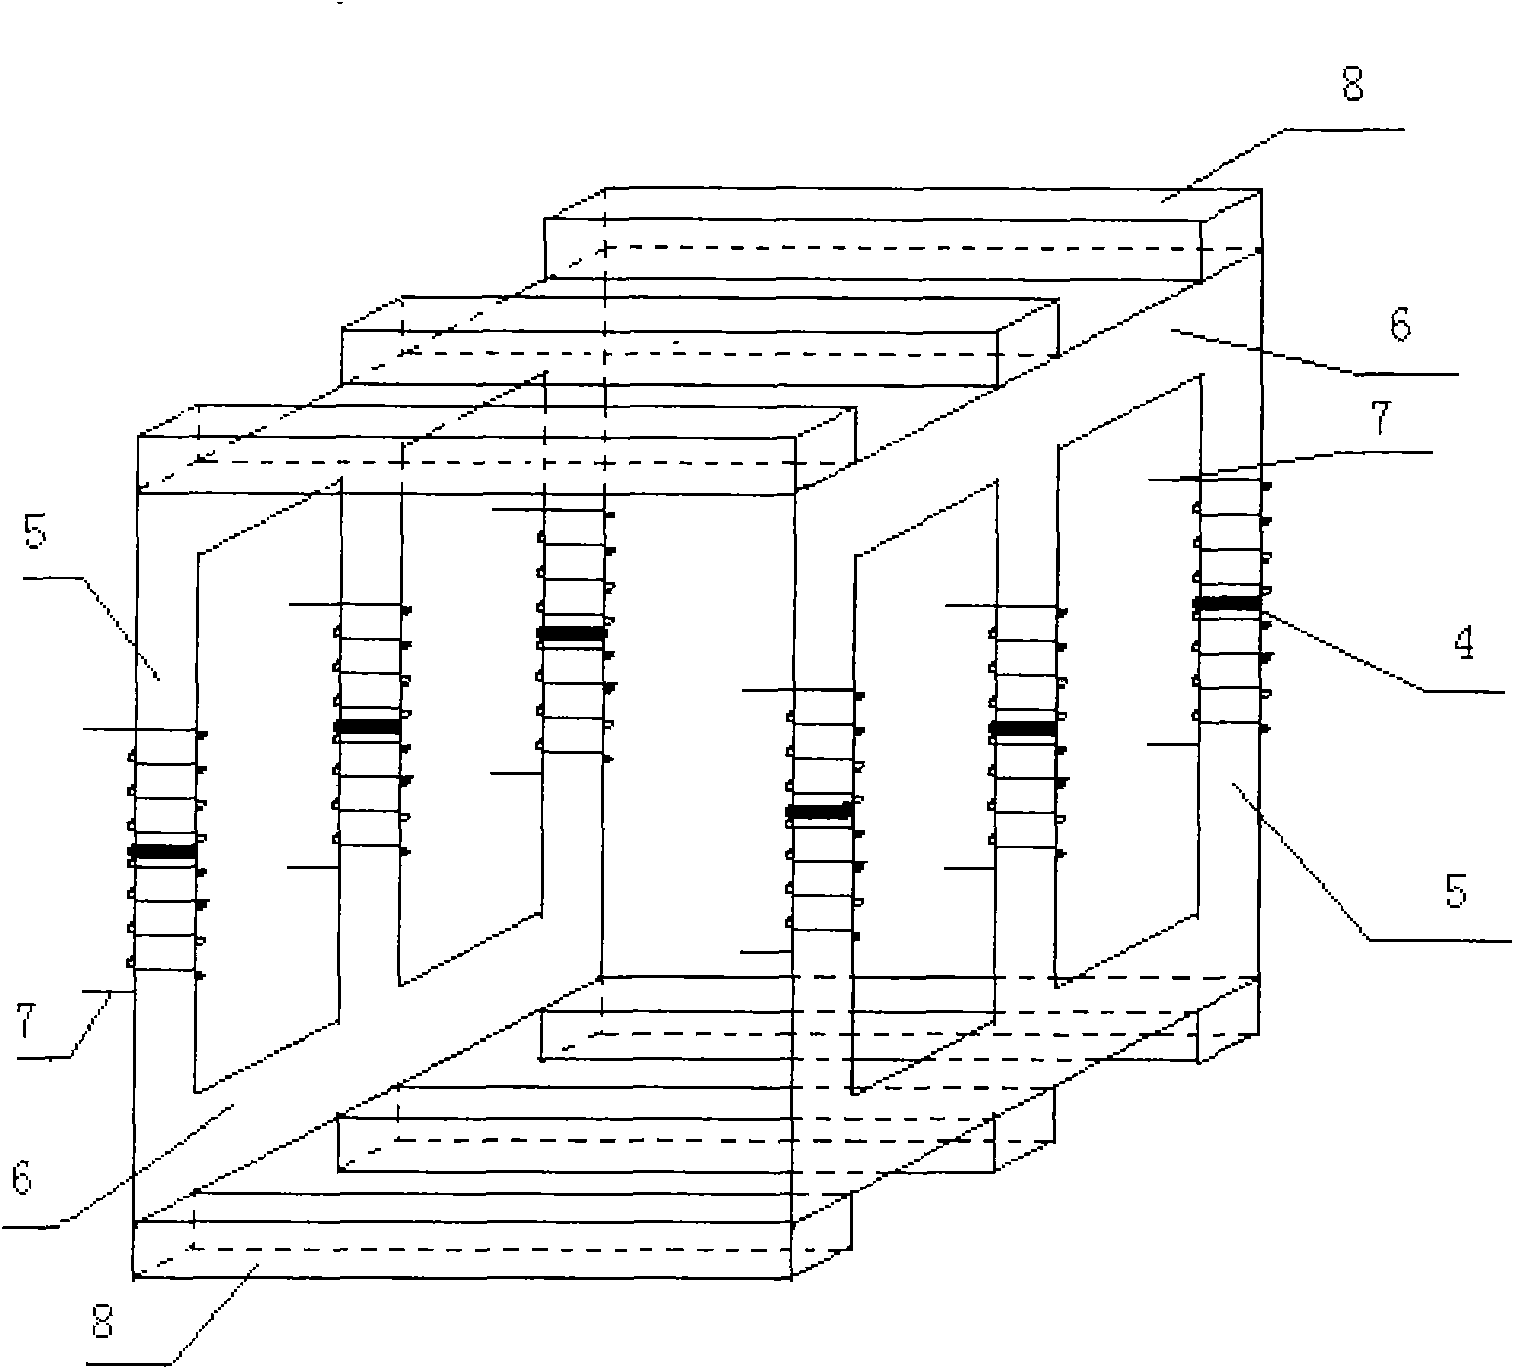 Controllable reactor with air gap